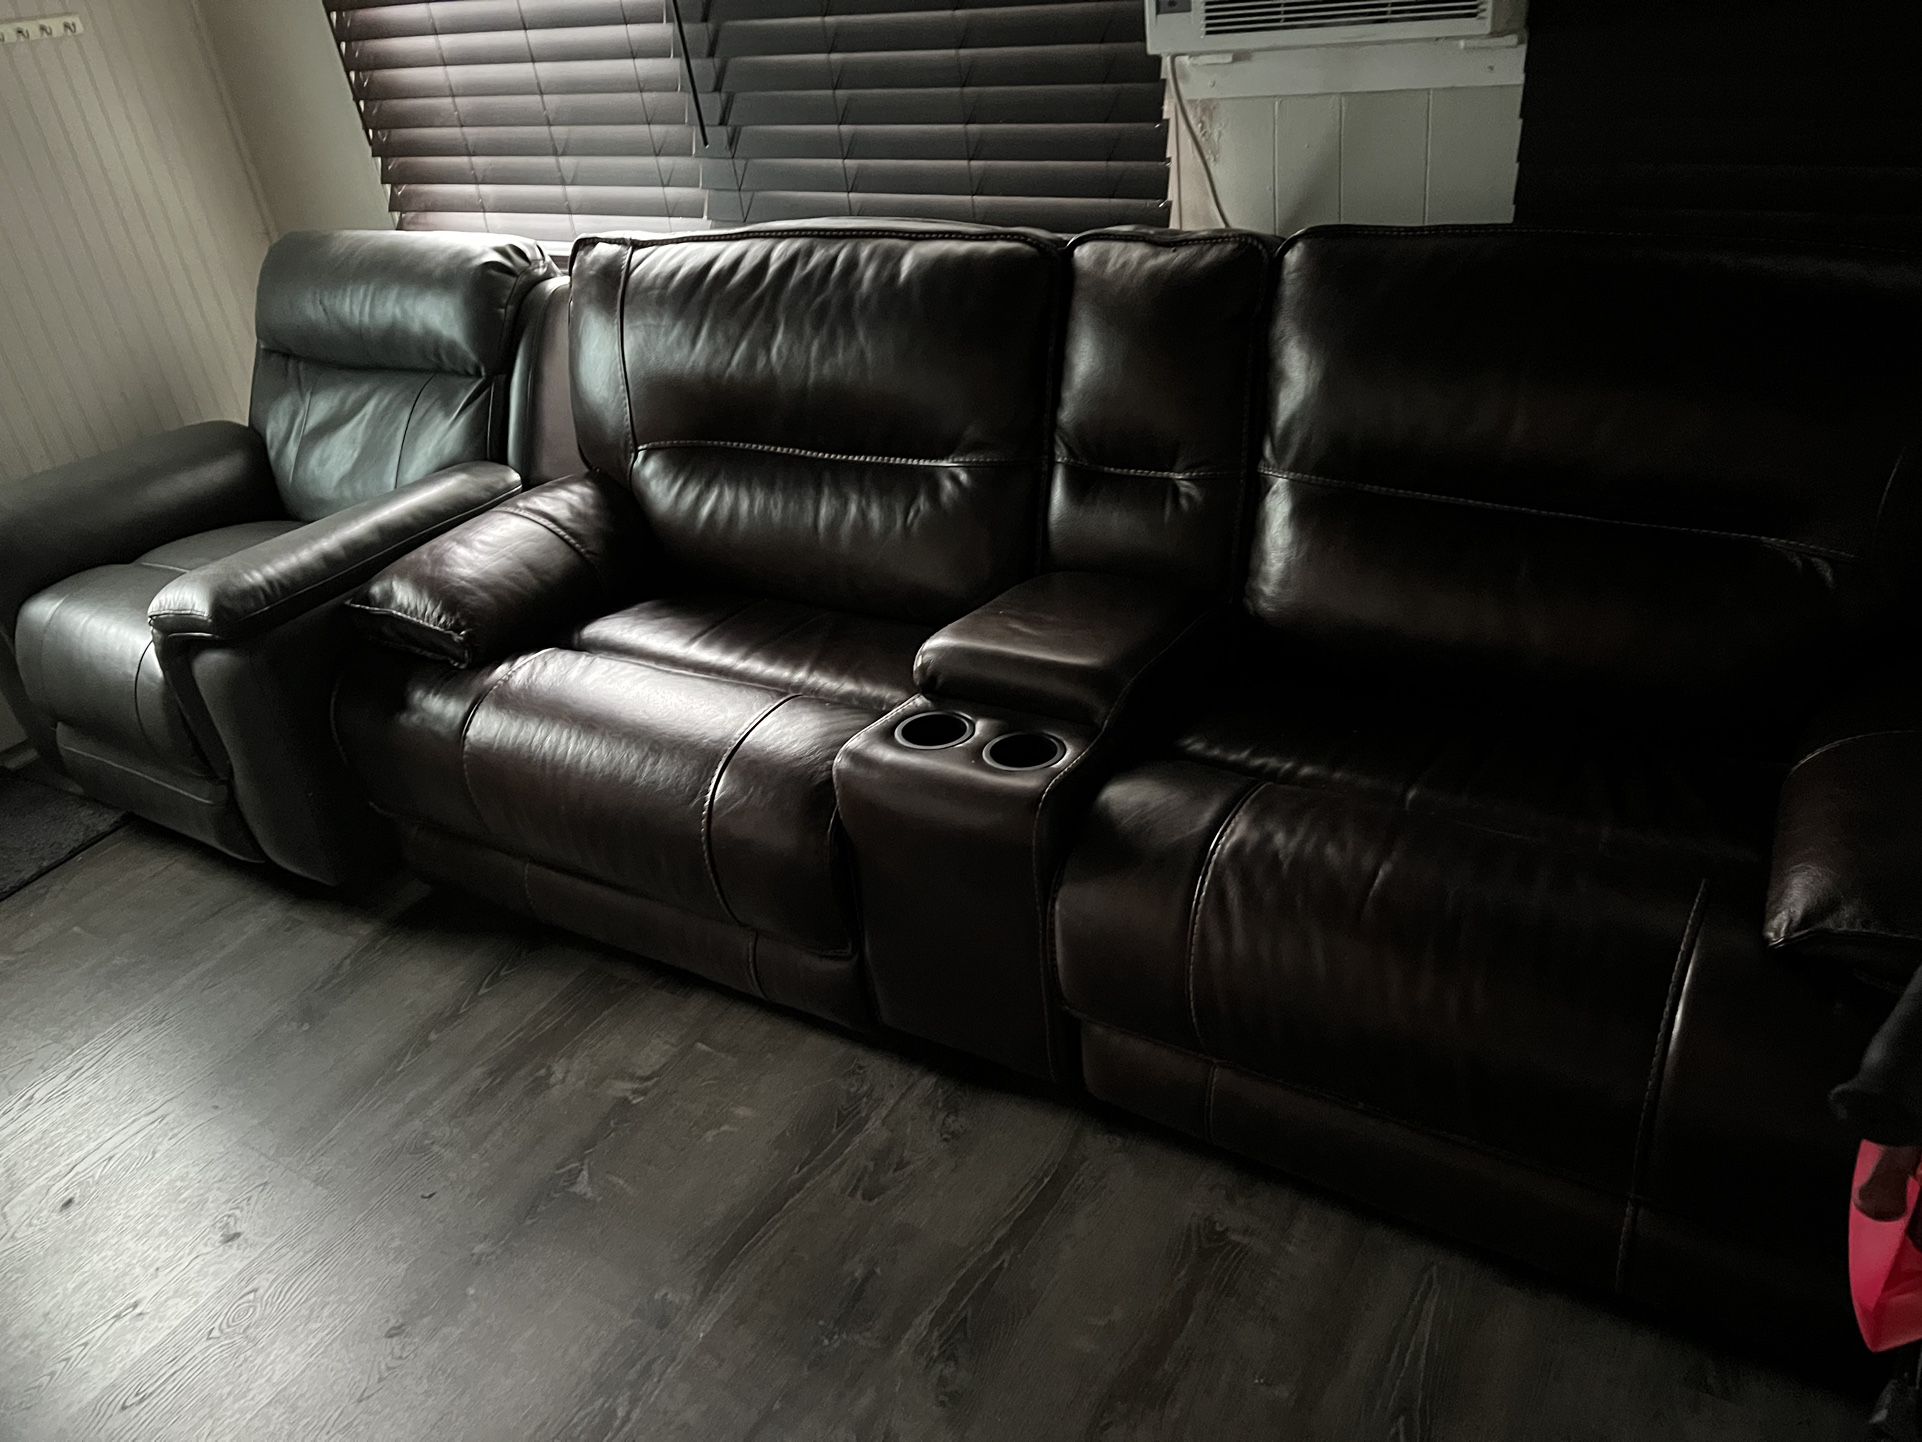 Powered Leather Loveseat Recliners And Lazy boy Chair